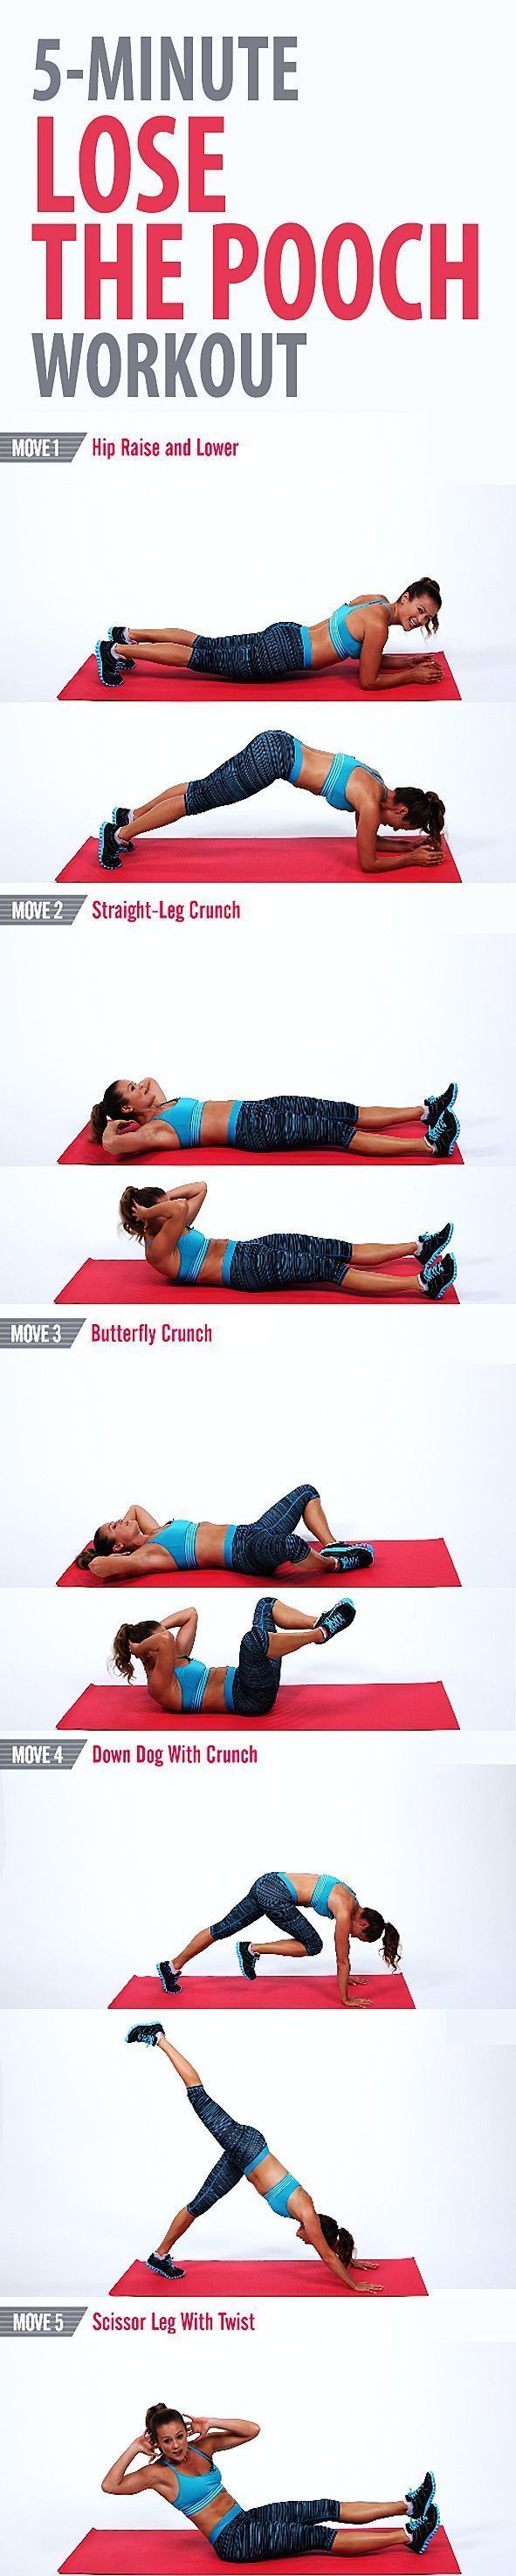 Try this quick and focused workout to tone the lower part of your abs and work off the pooch.